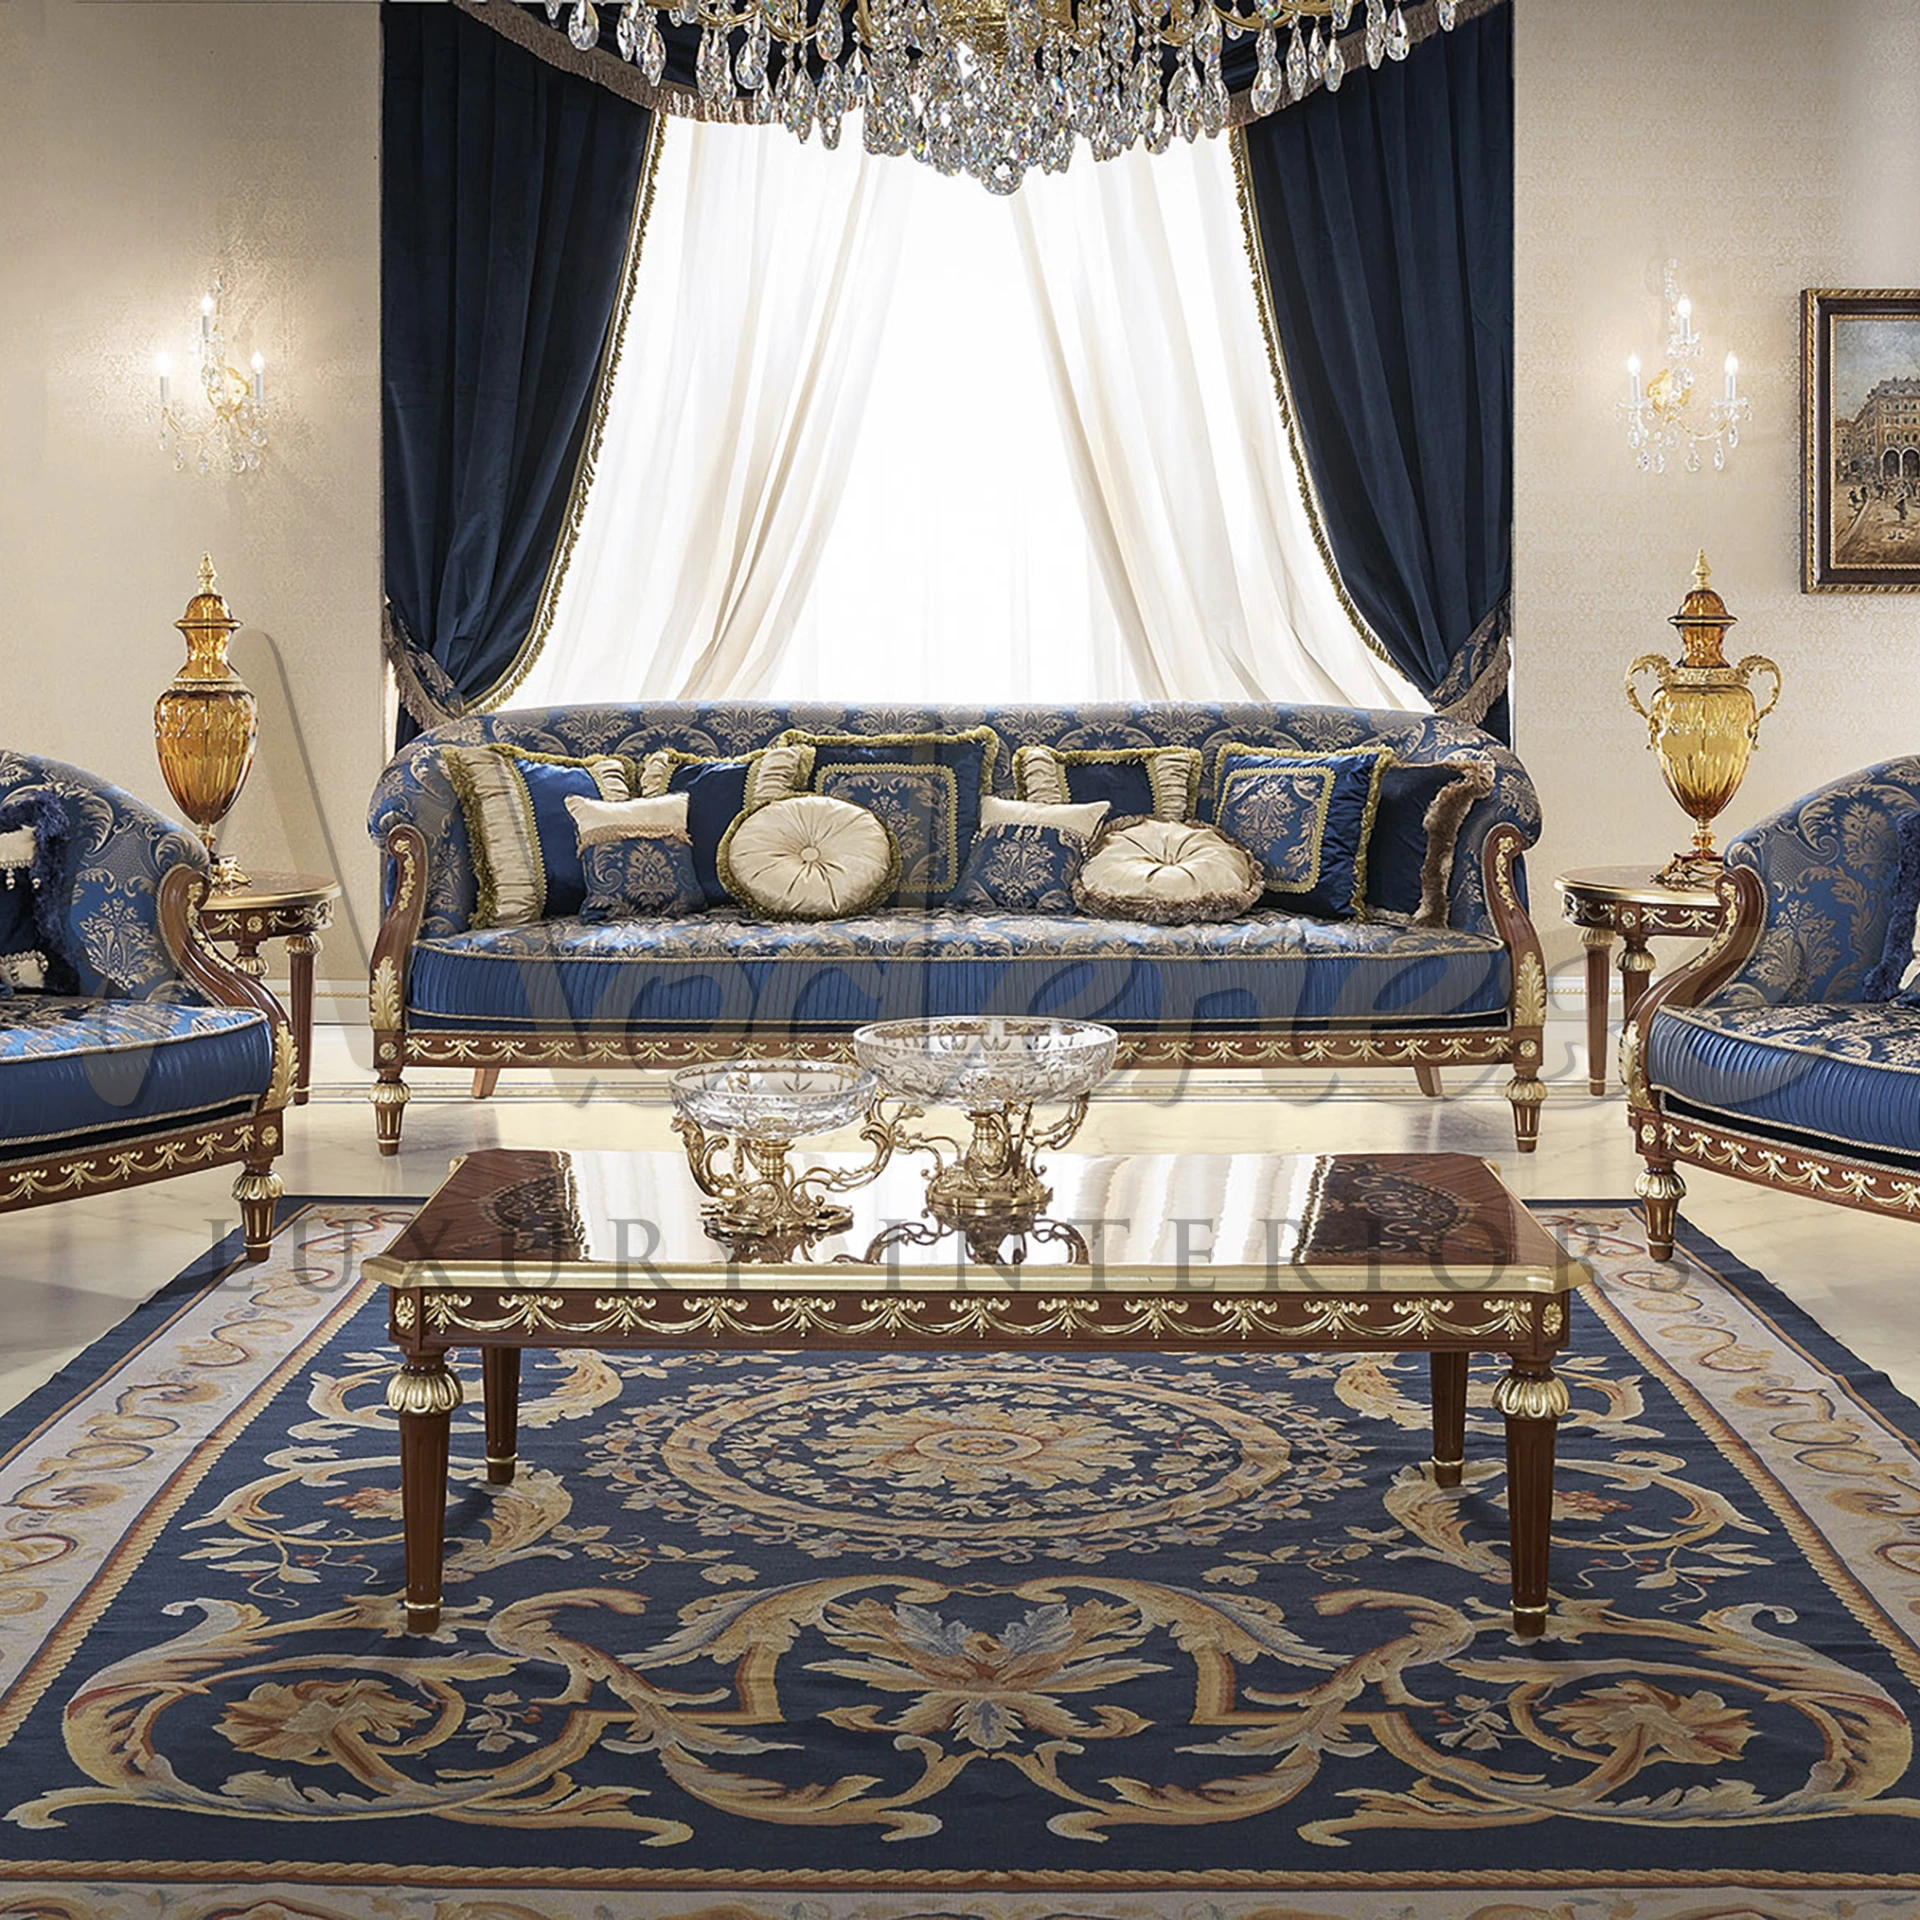 An opulent Royal Classic Sofa, boasting ornate carvings and sumptuous fabric, ideal for adding a touch of luxury to any living space.